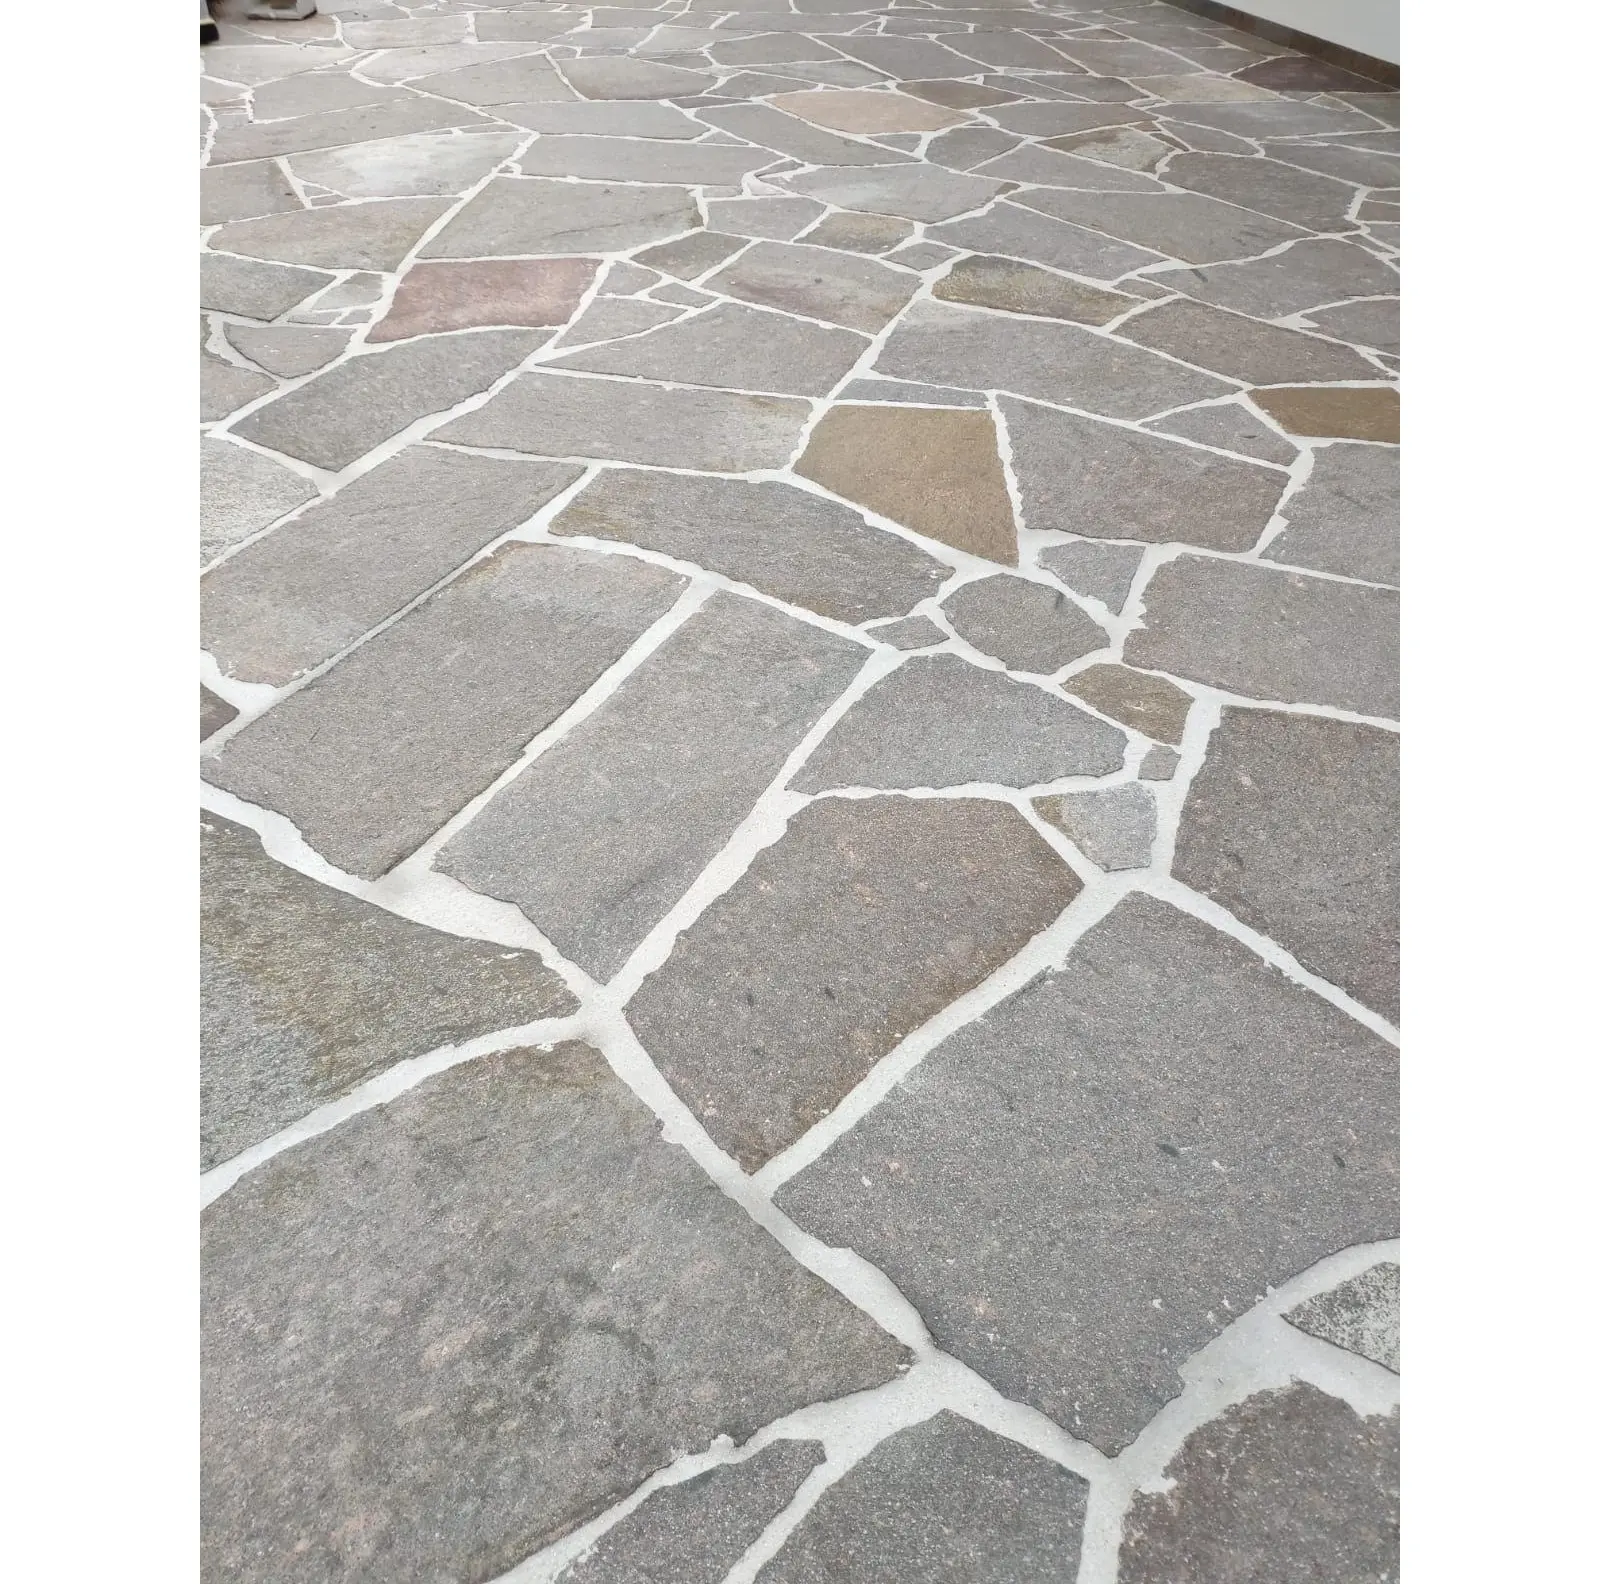 Holler Porfidi Brand PLASGI3-6 7.1.3 Natural Stone Porphyry With Irregular Giant Slabs For Covering Avenues And Sidewalks